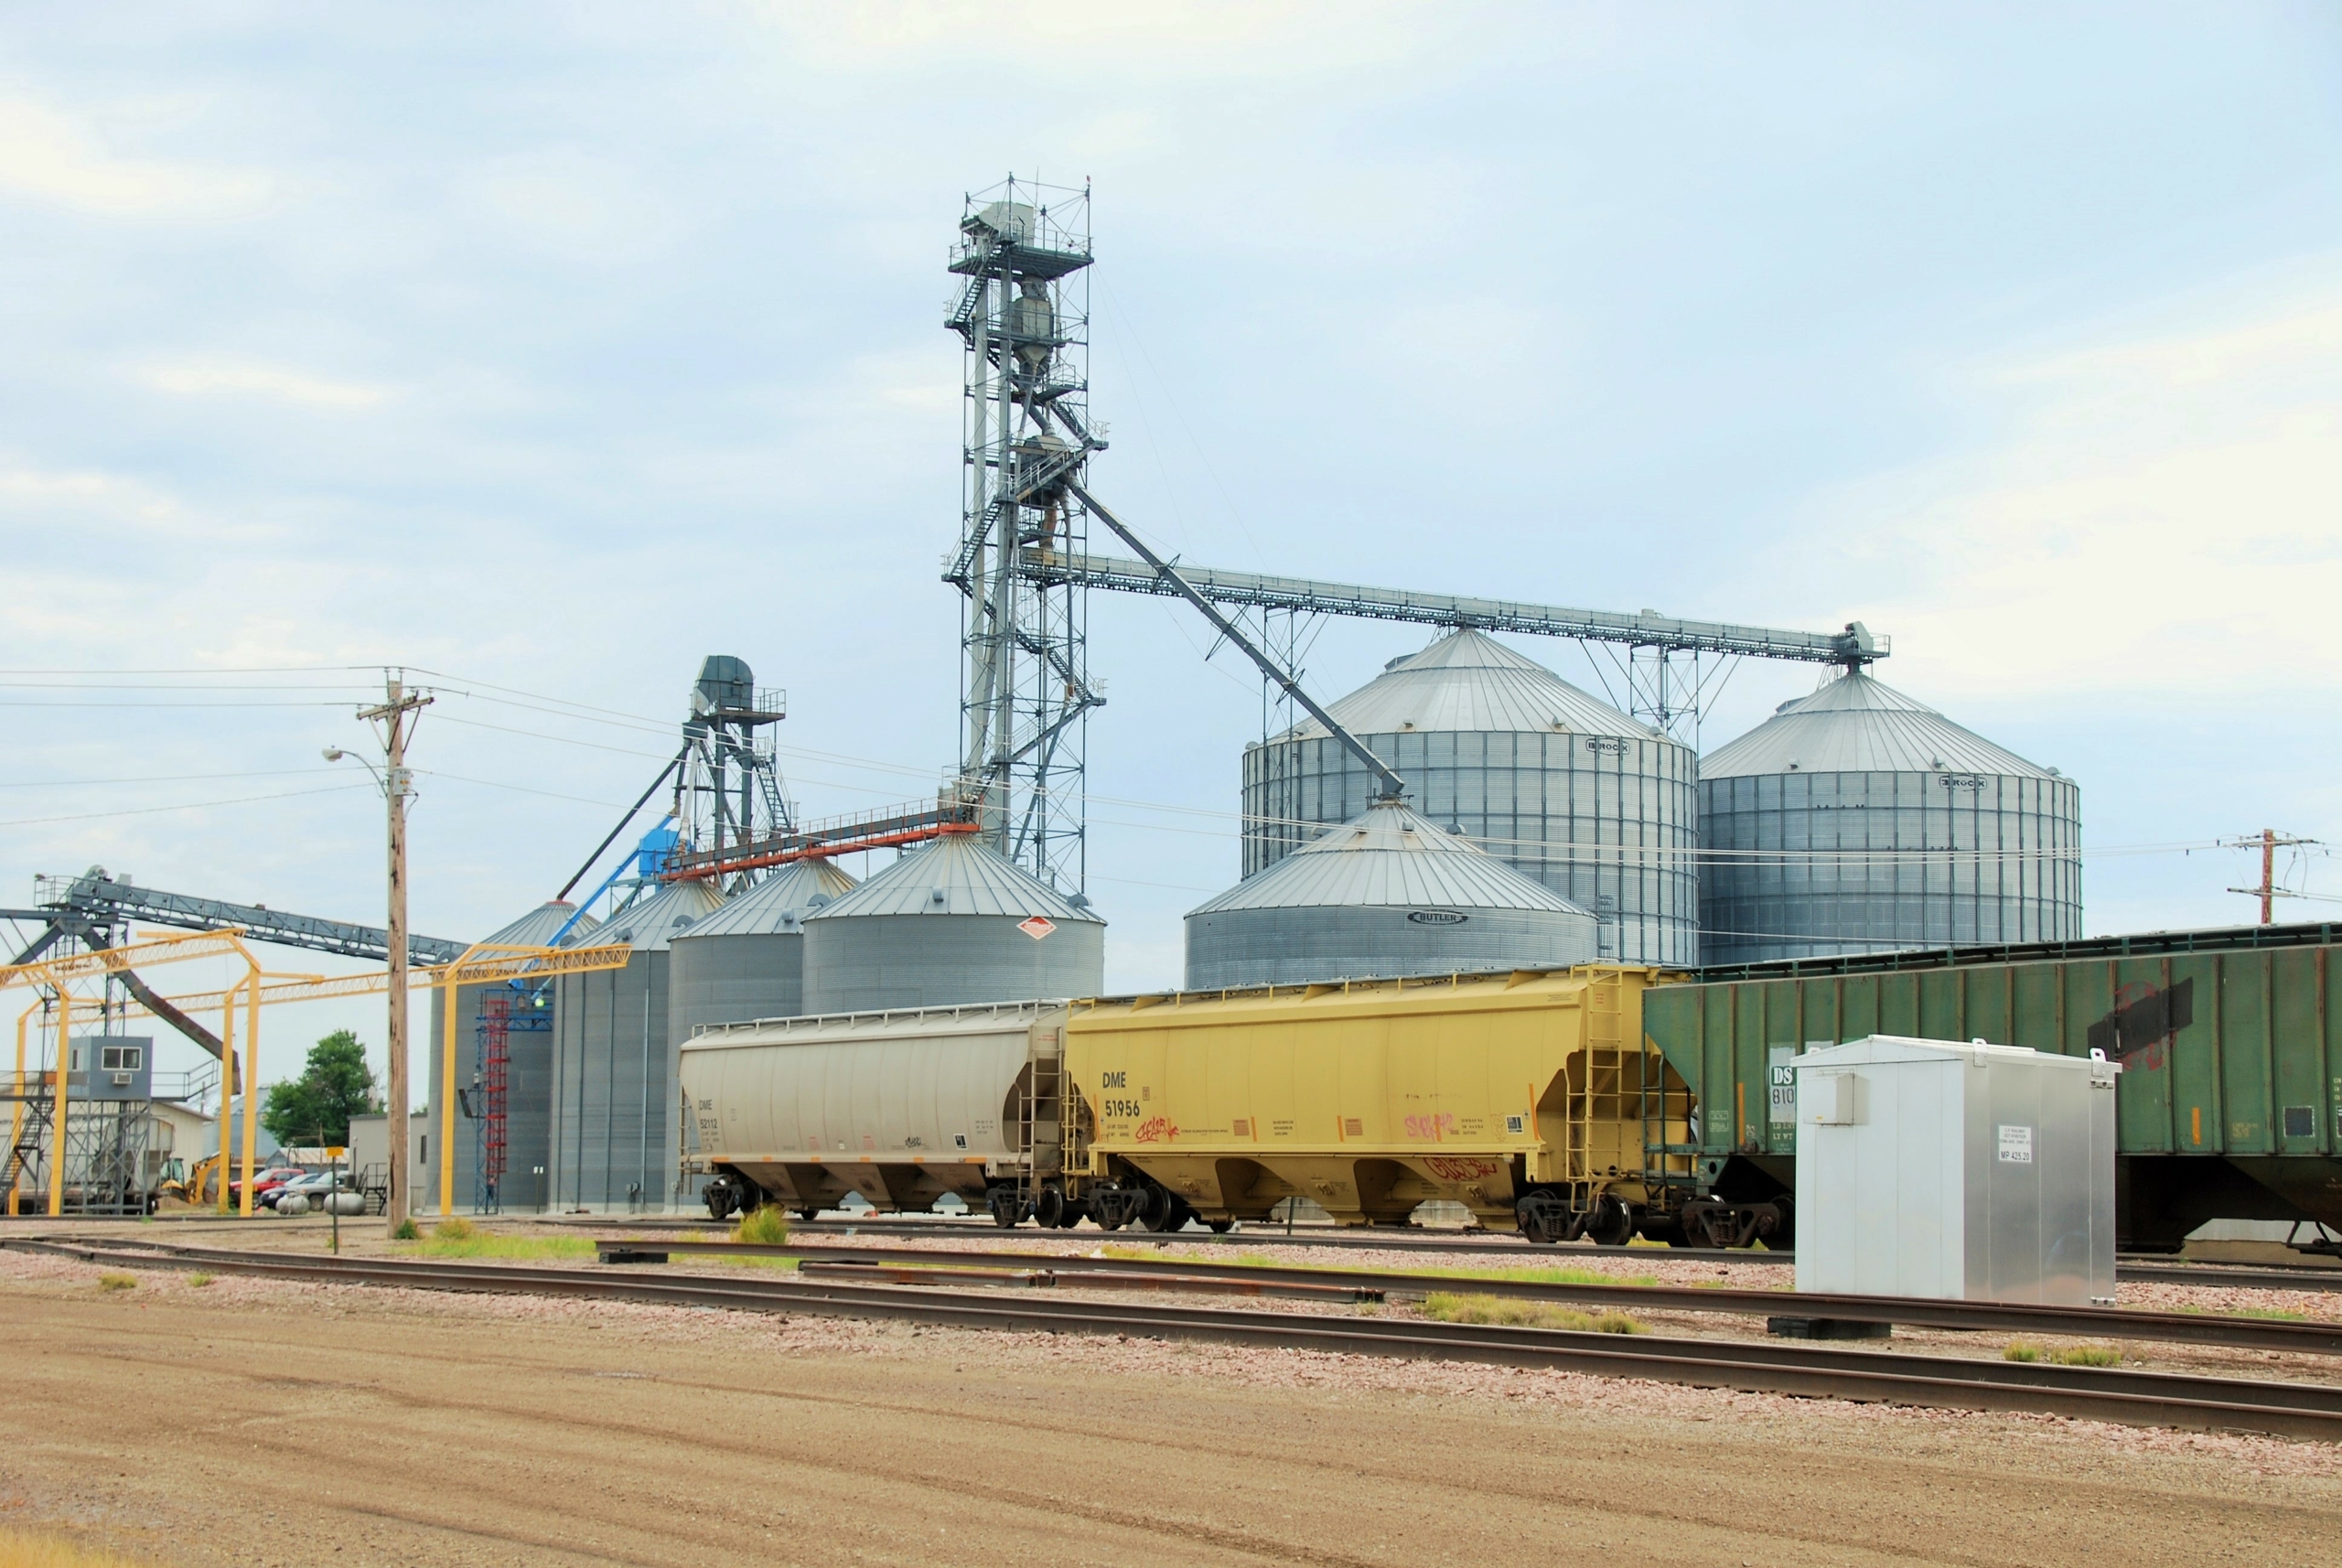 Elevator and train cars to illustrate U.S. supply chain maintenance investments.